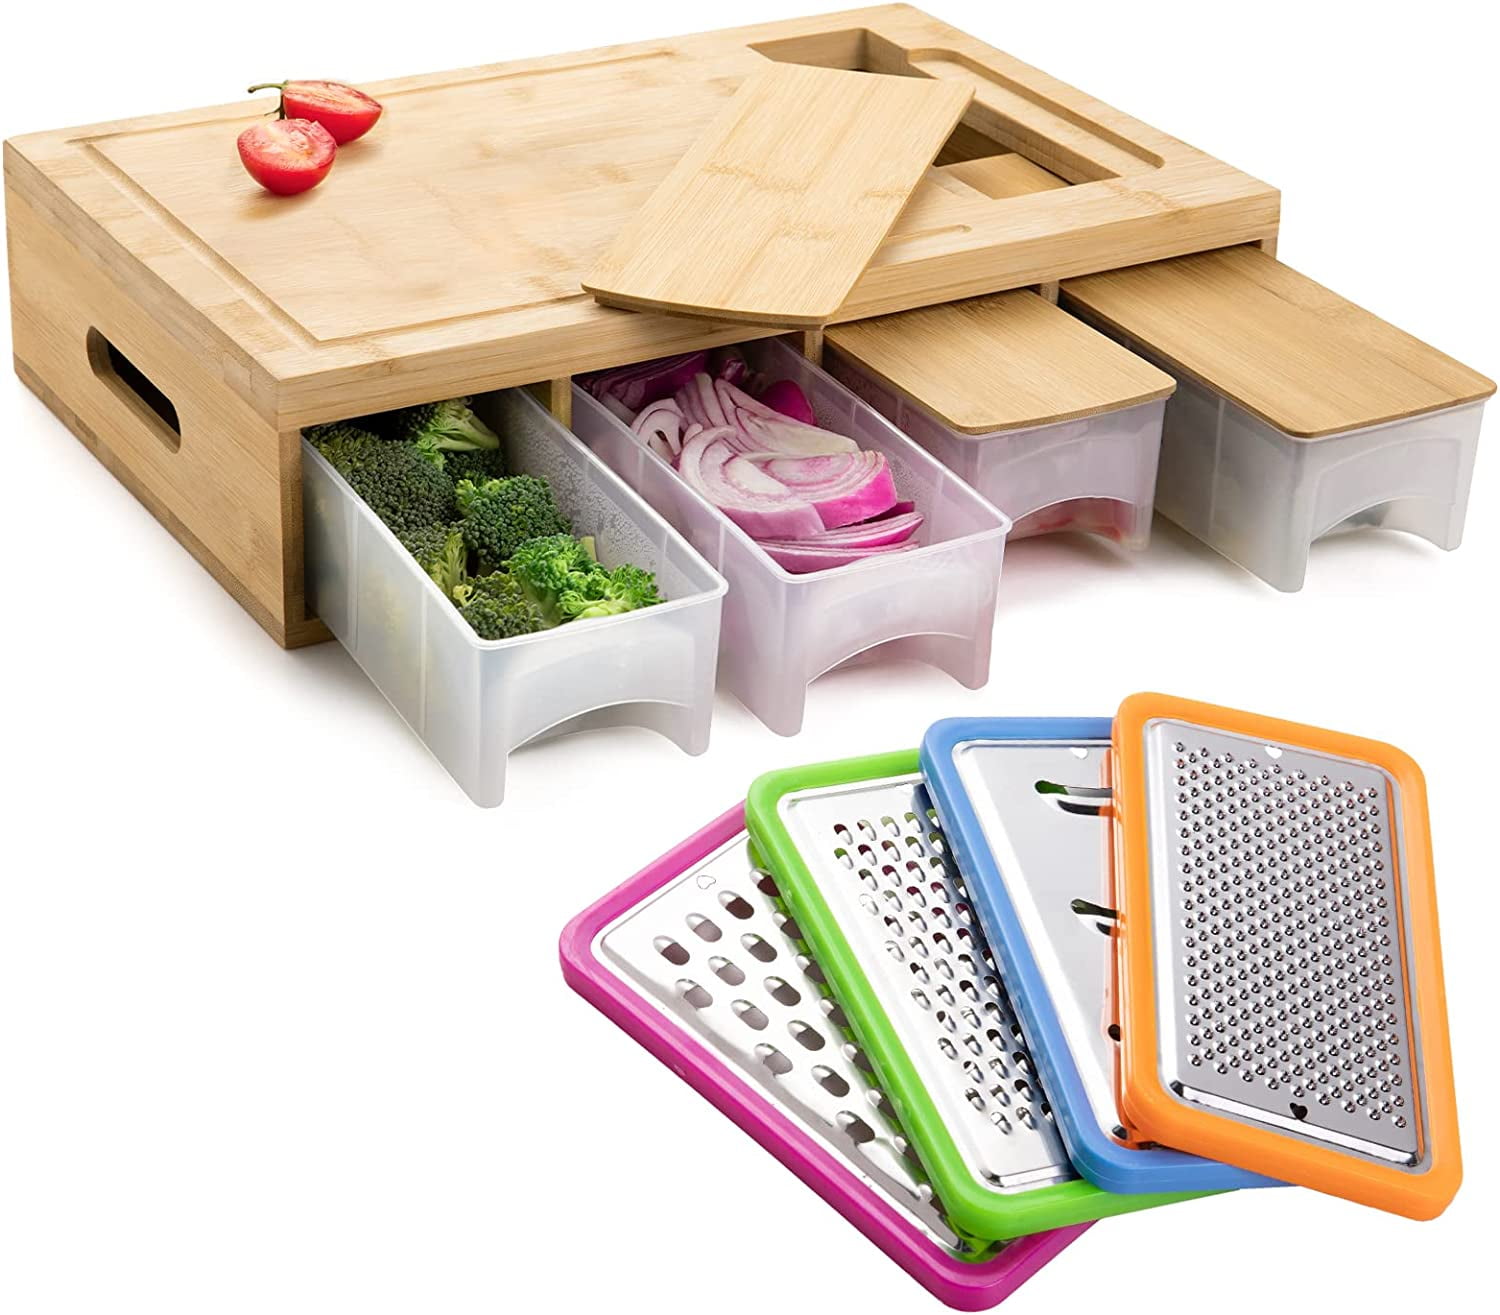 Bamboo Cutting Board with Containers - Meal Prep Station with Removable Top